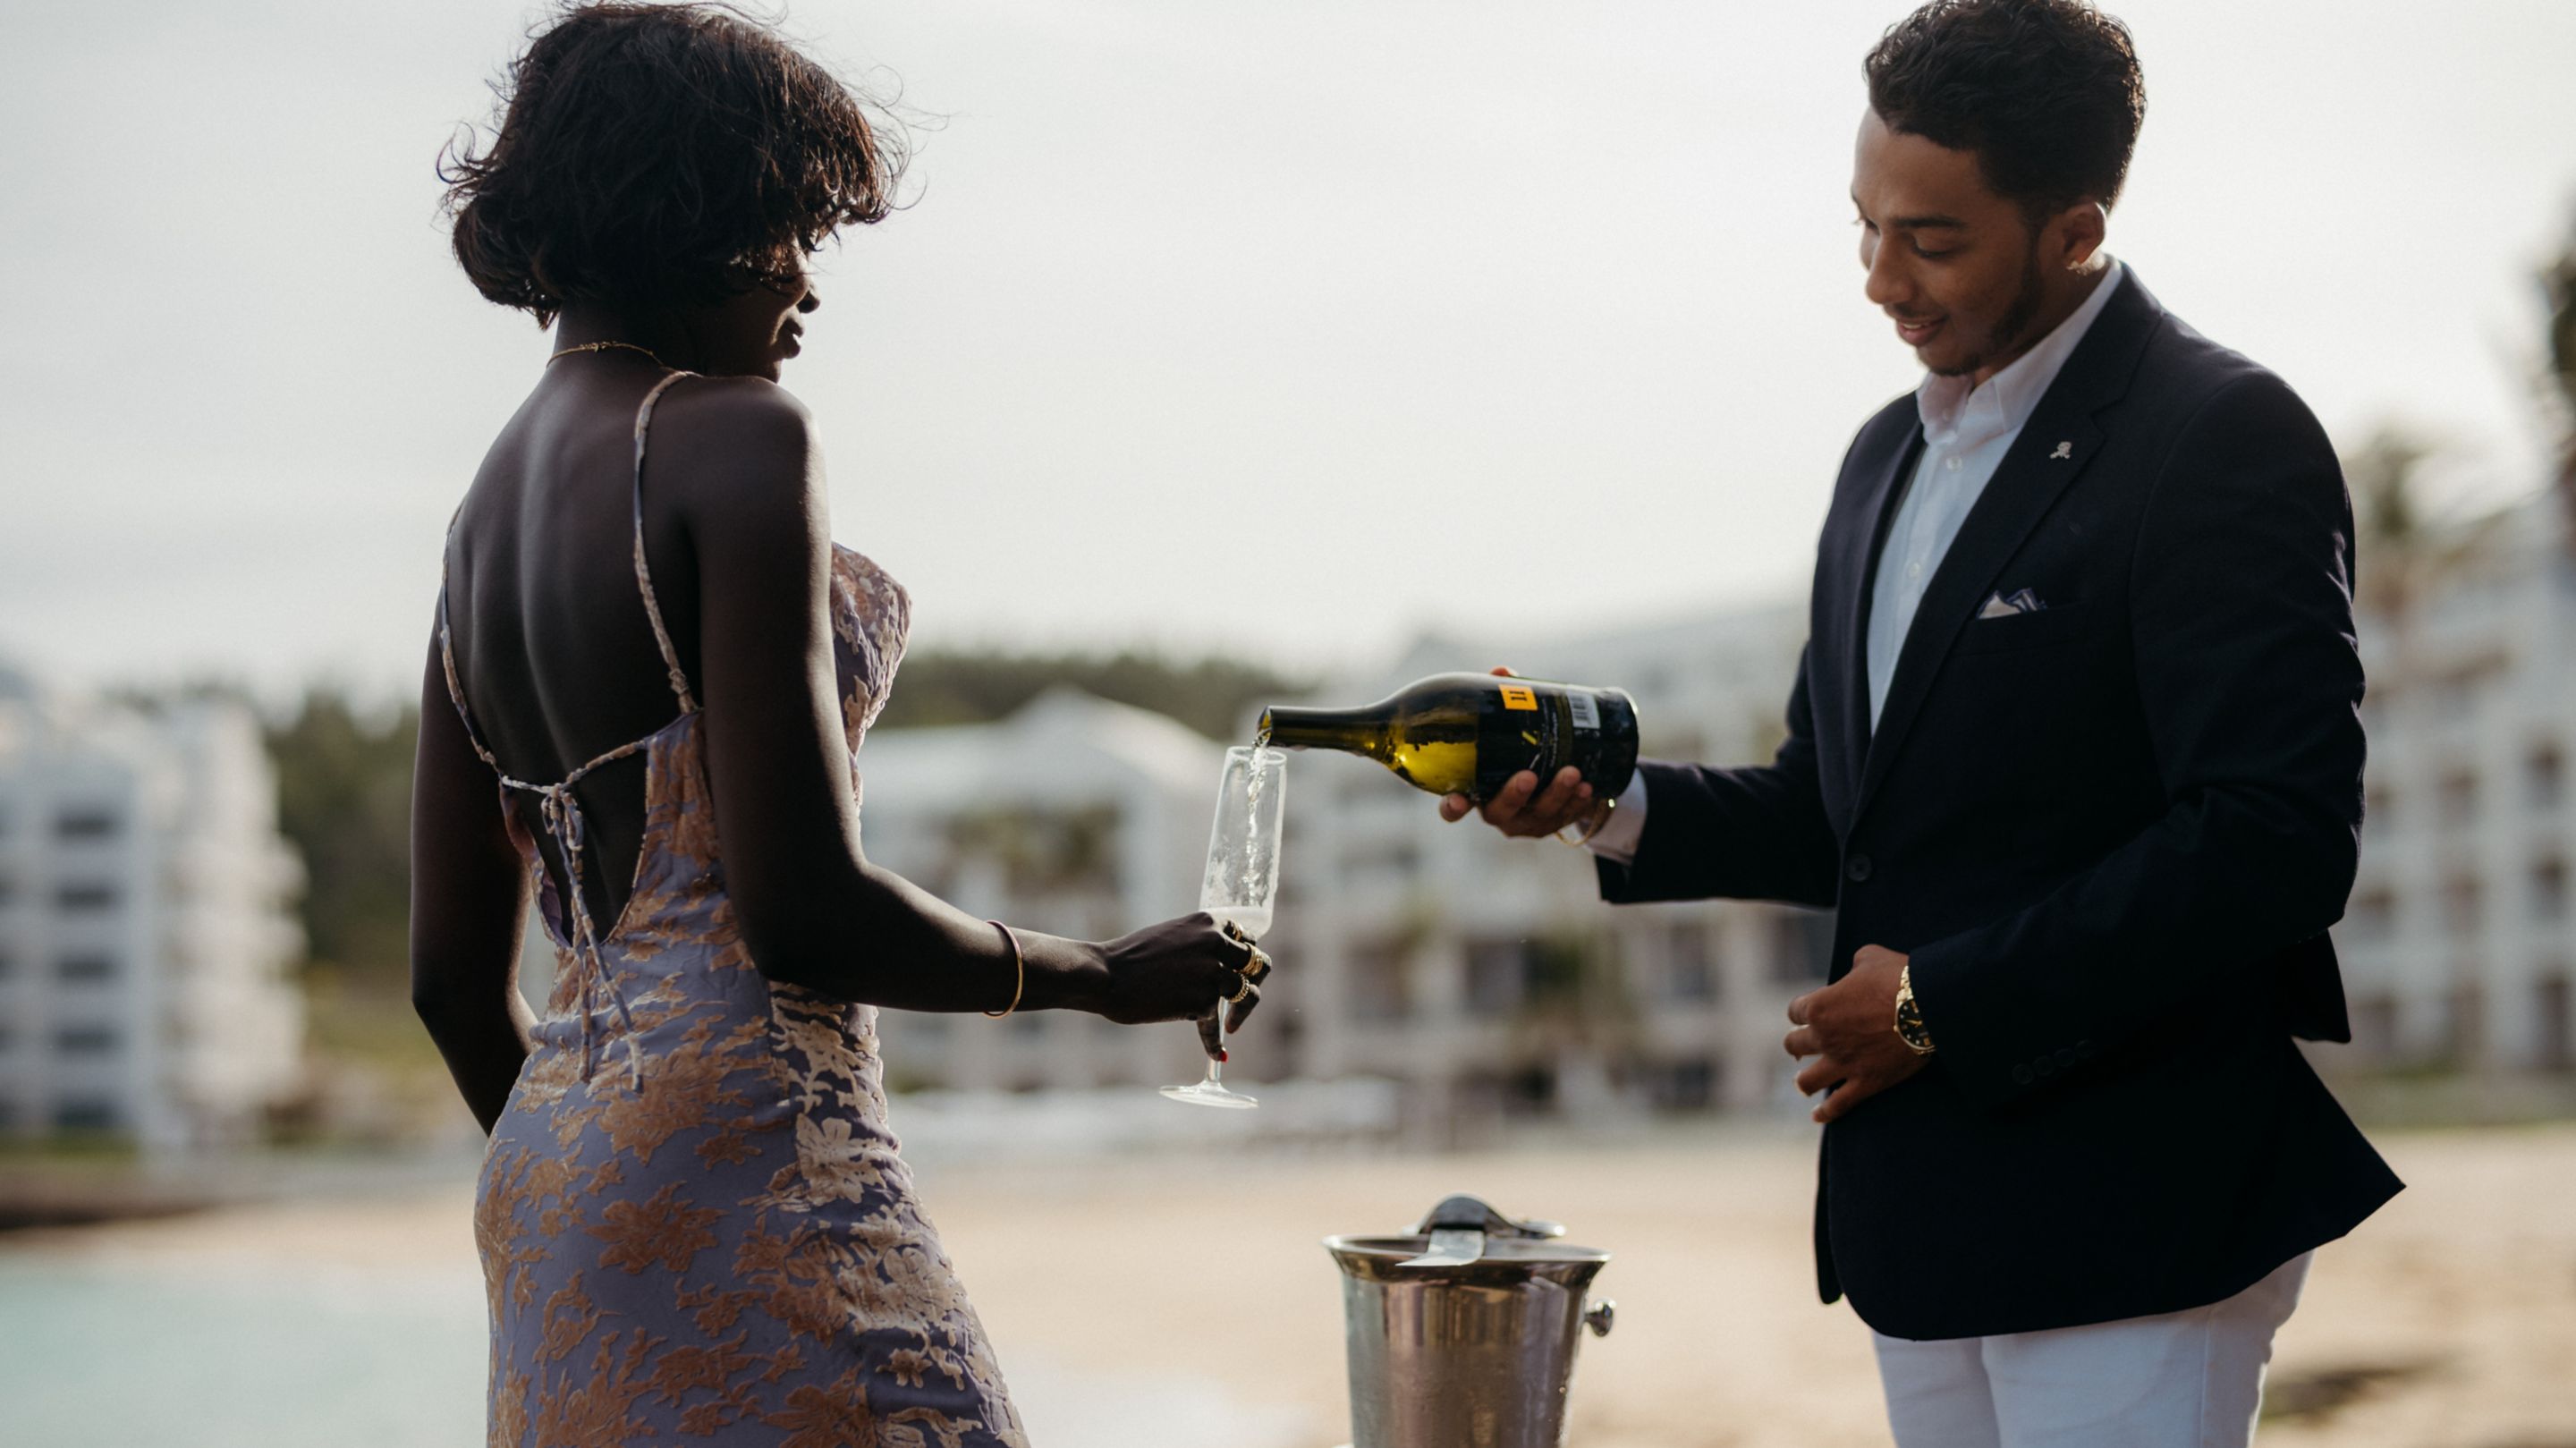 A couple standing together outside pouring wine into glasses.